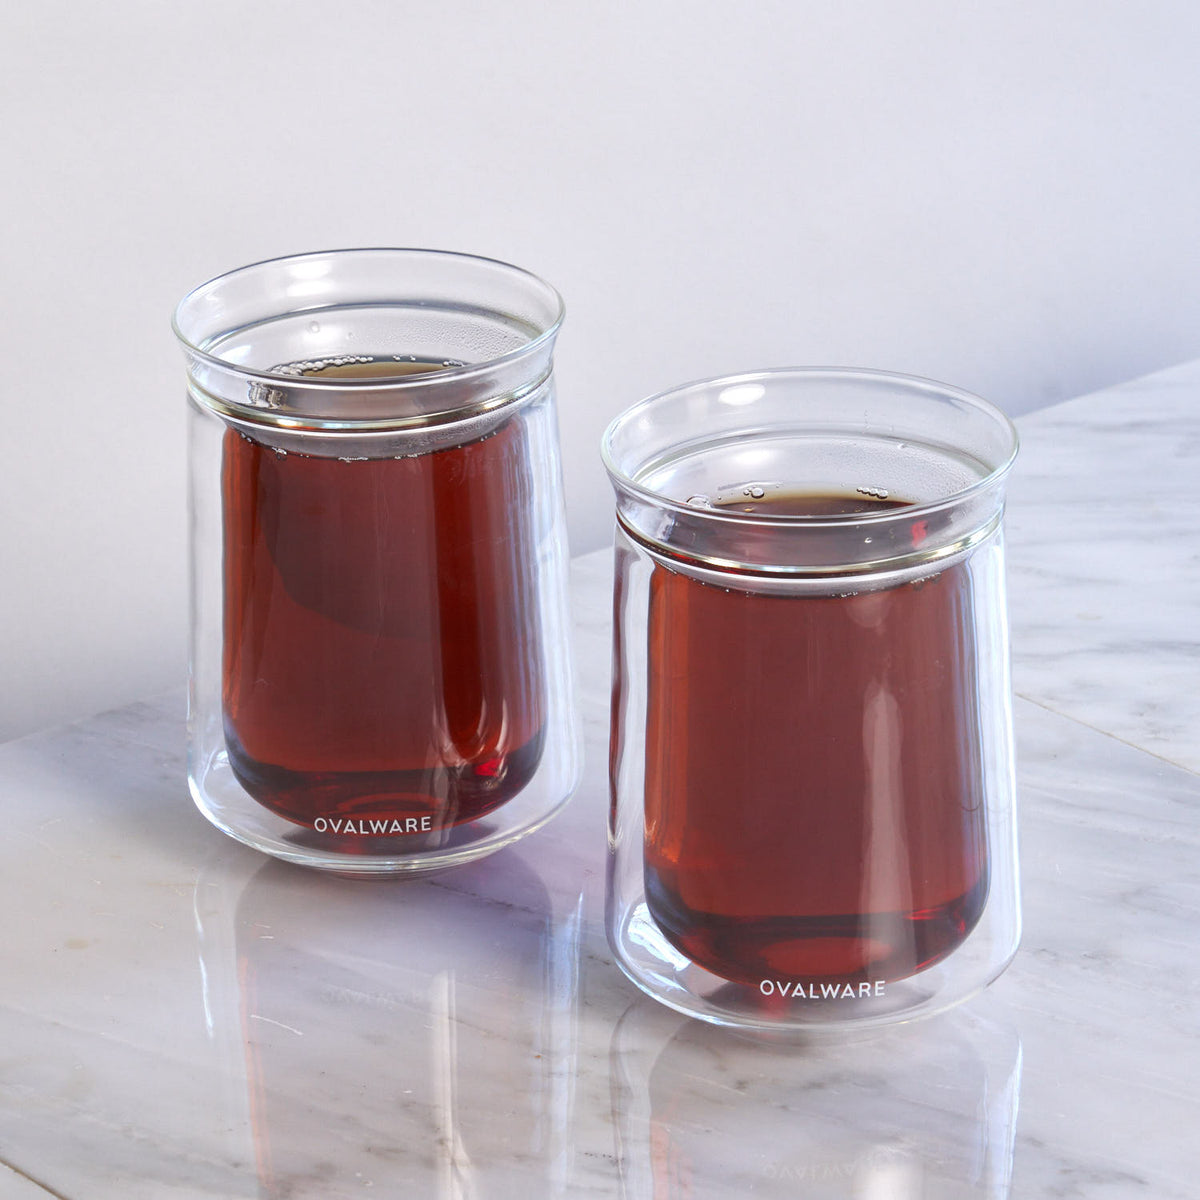 Ovalware Tasting Glass Set: A Refined Drinking Experience